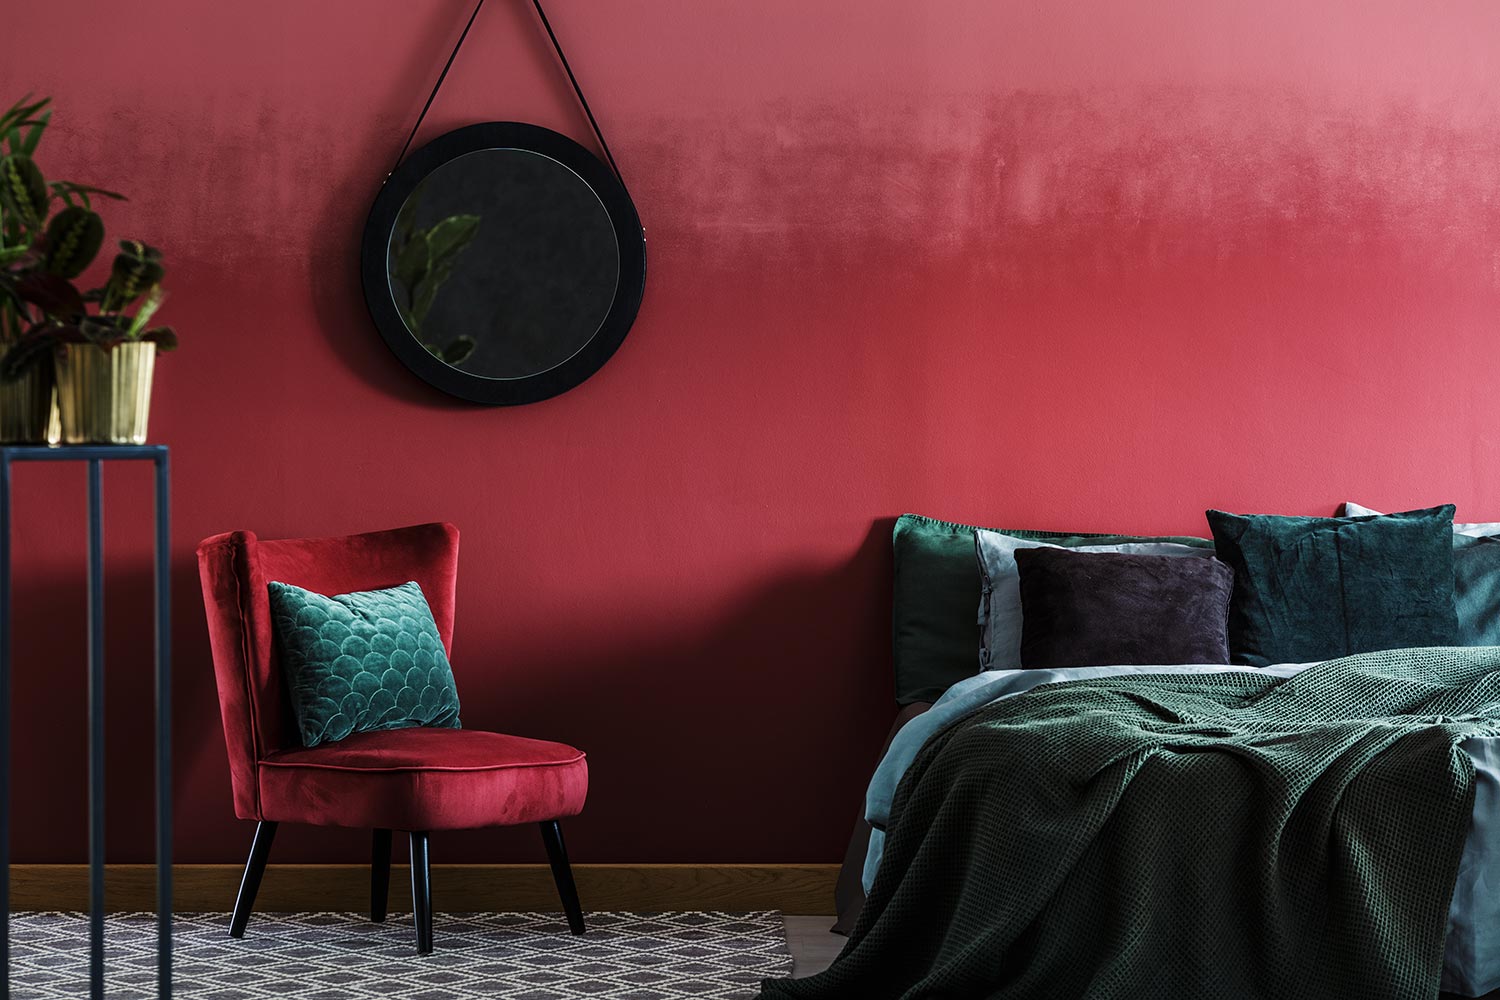 Burgundy bedroom interior with armchair and round mirror hanging on the wall